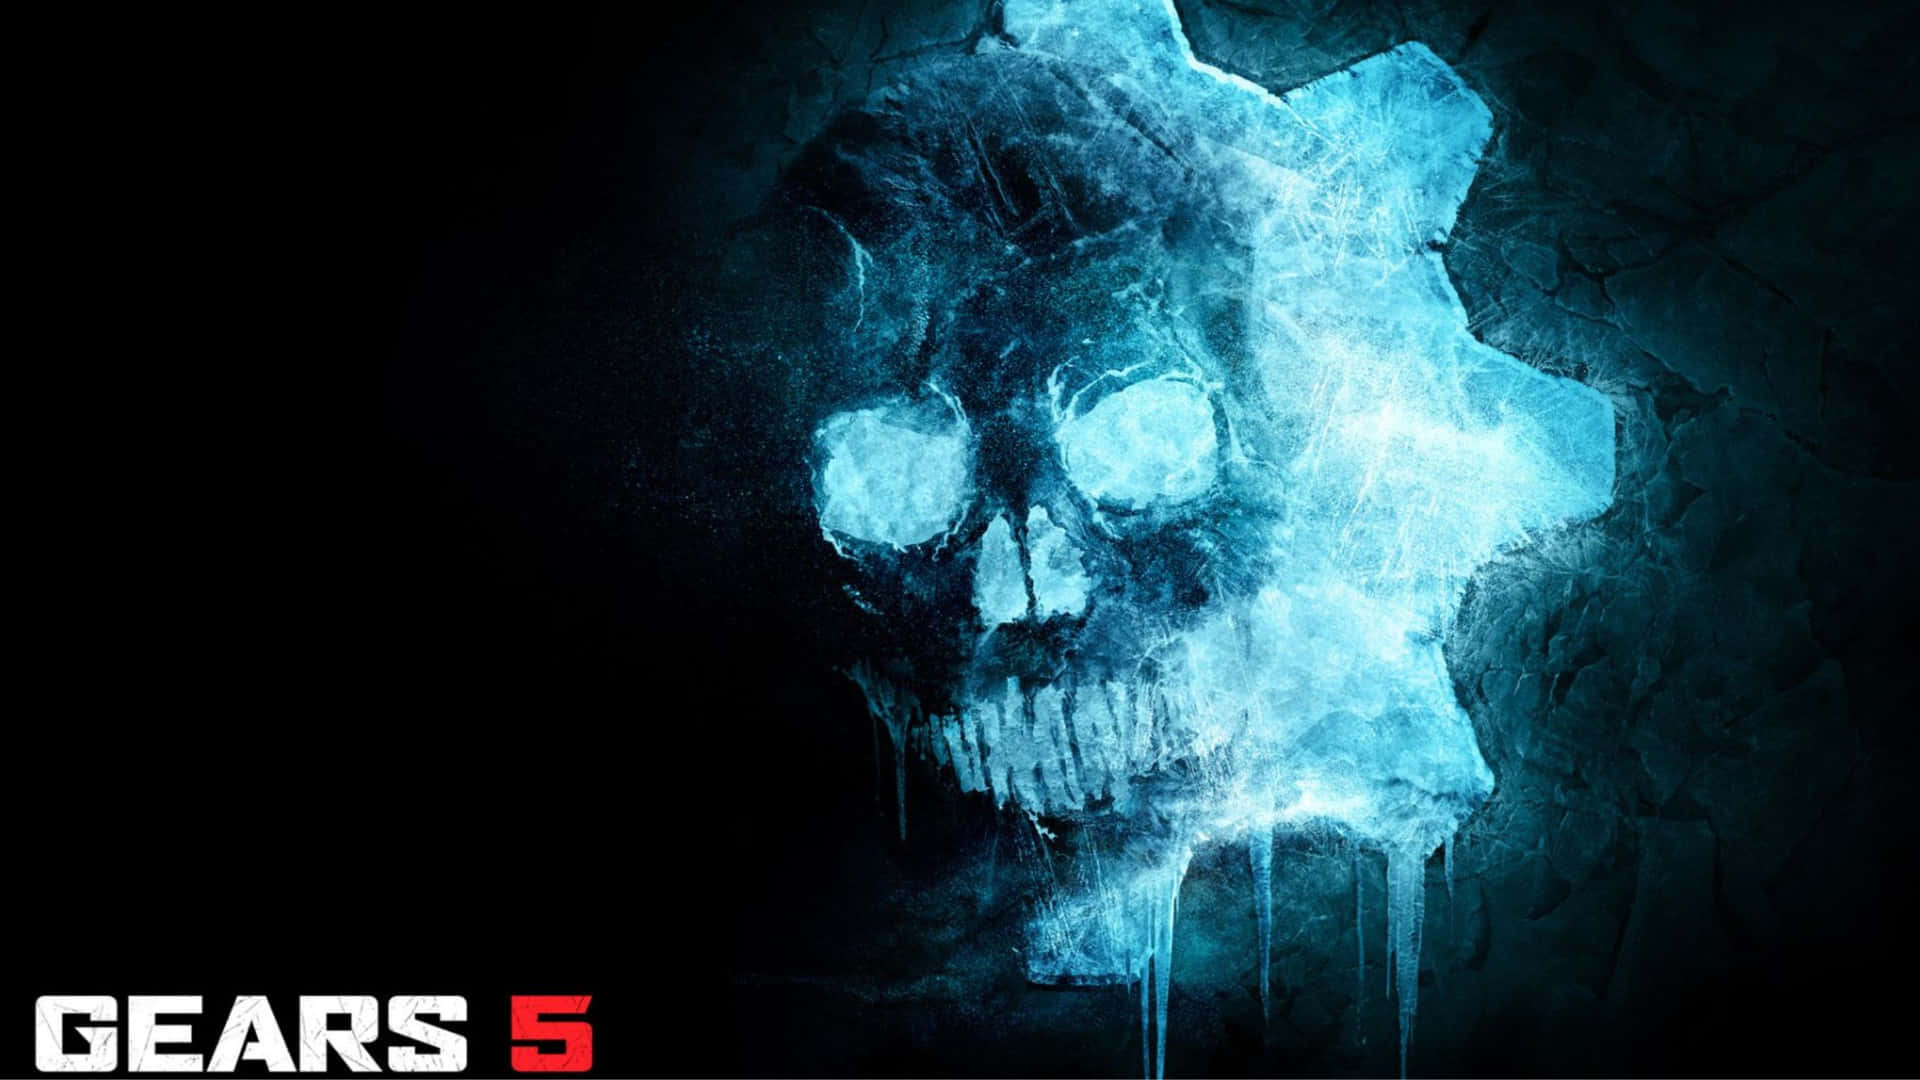 Get ready for the next chapter in the Gears of War saga